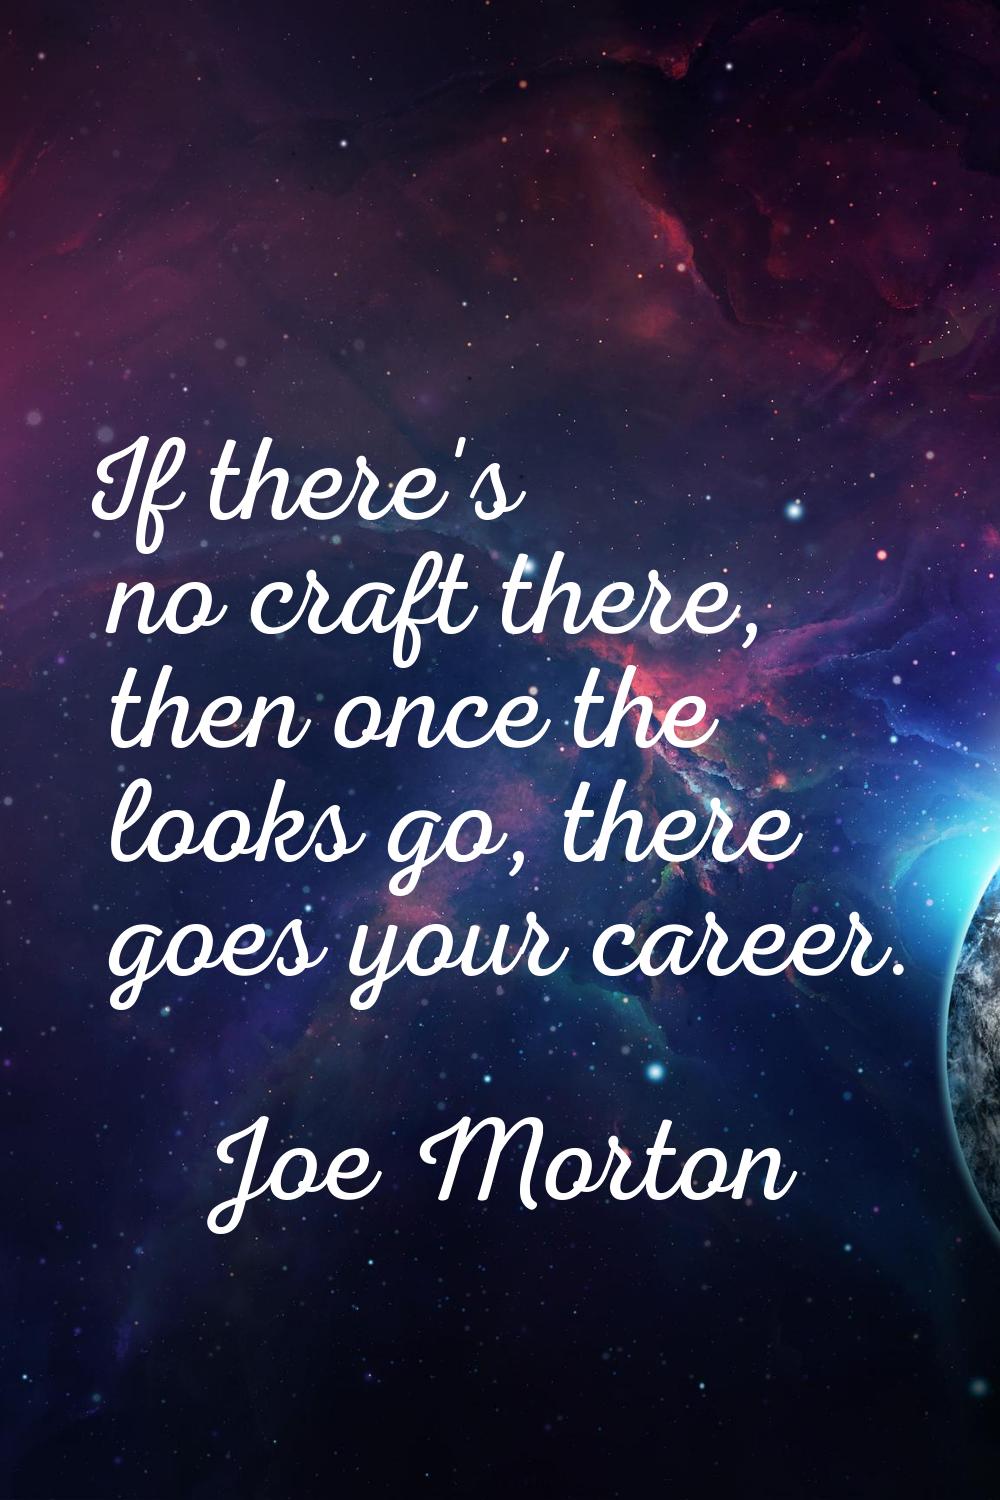 If there's no craft there, then once the looks go, there goes your career.